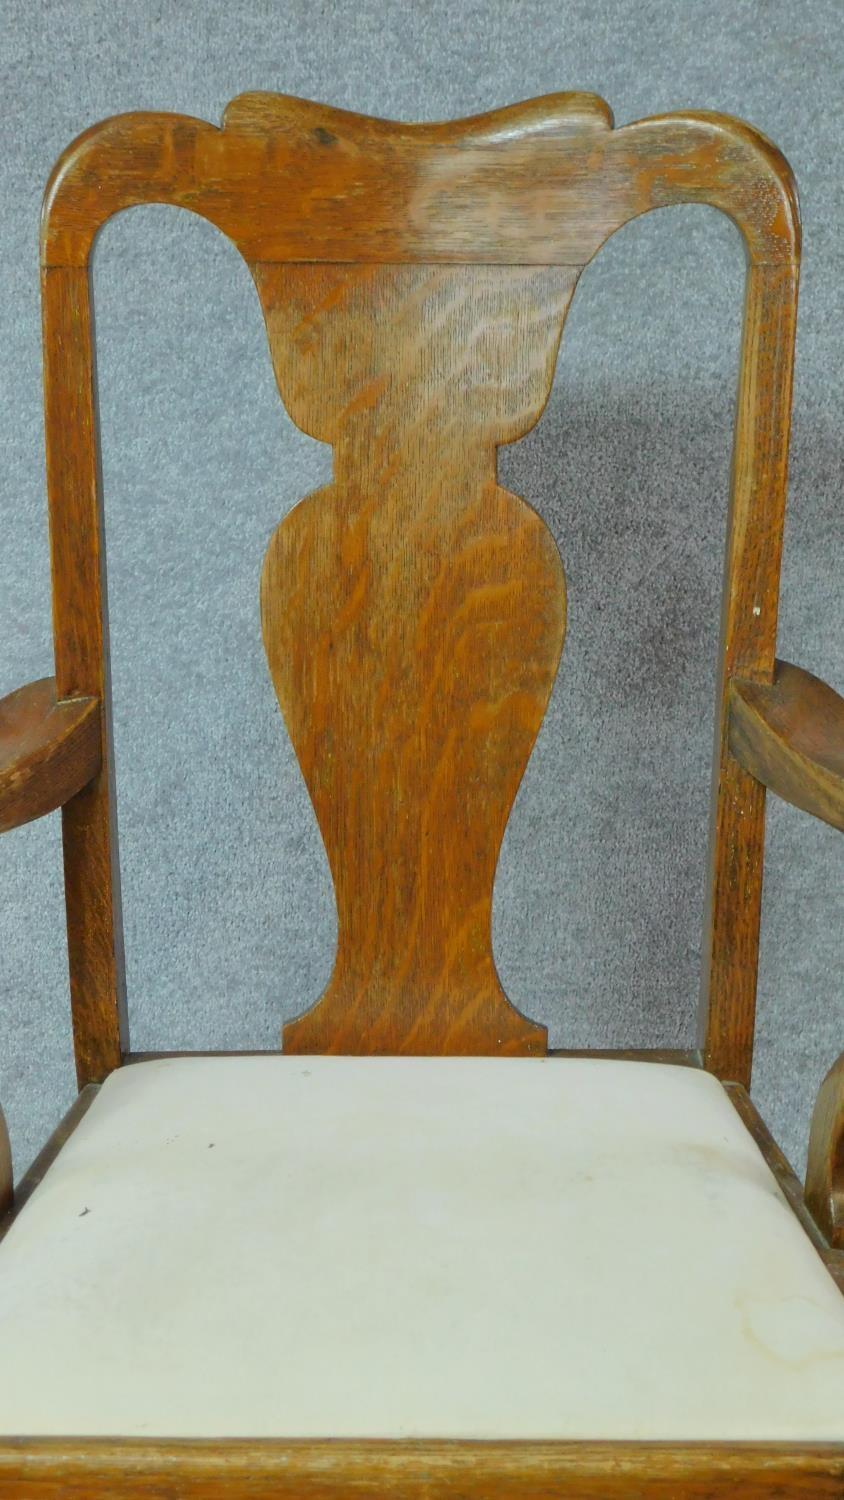 A late 19th century oak early Georgian style armchair with vase splat back and drop in seat raised - Image 3 of 4